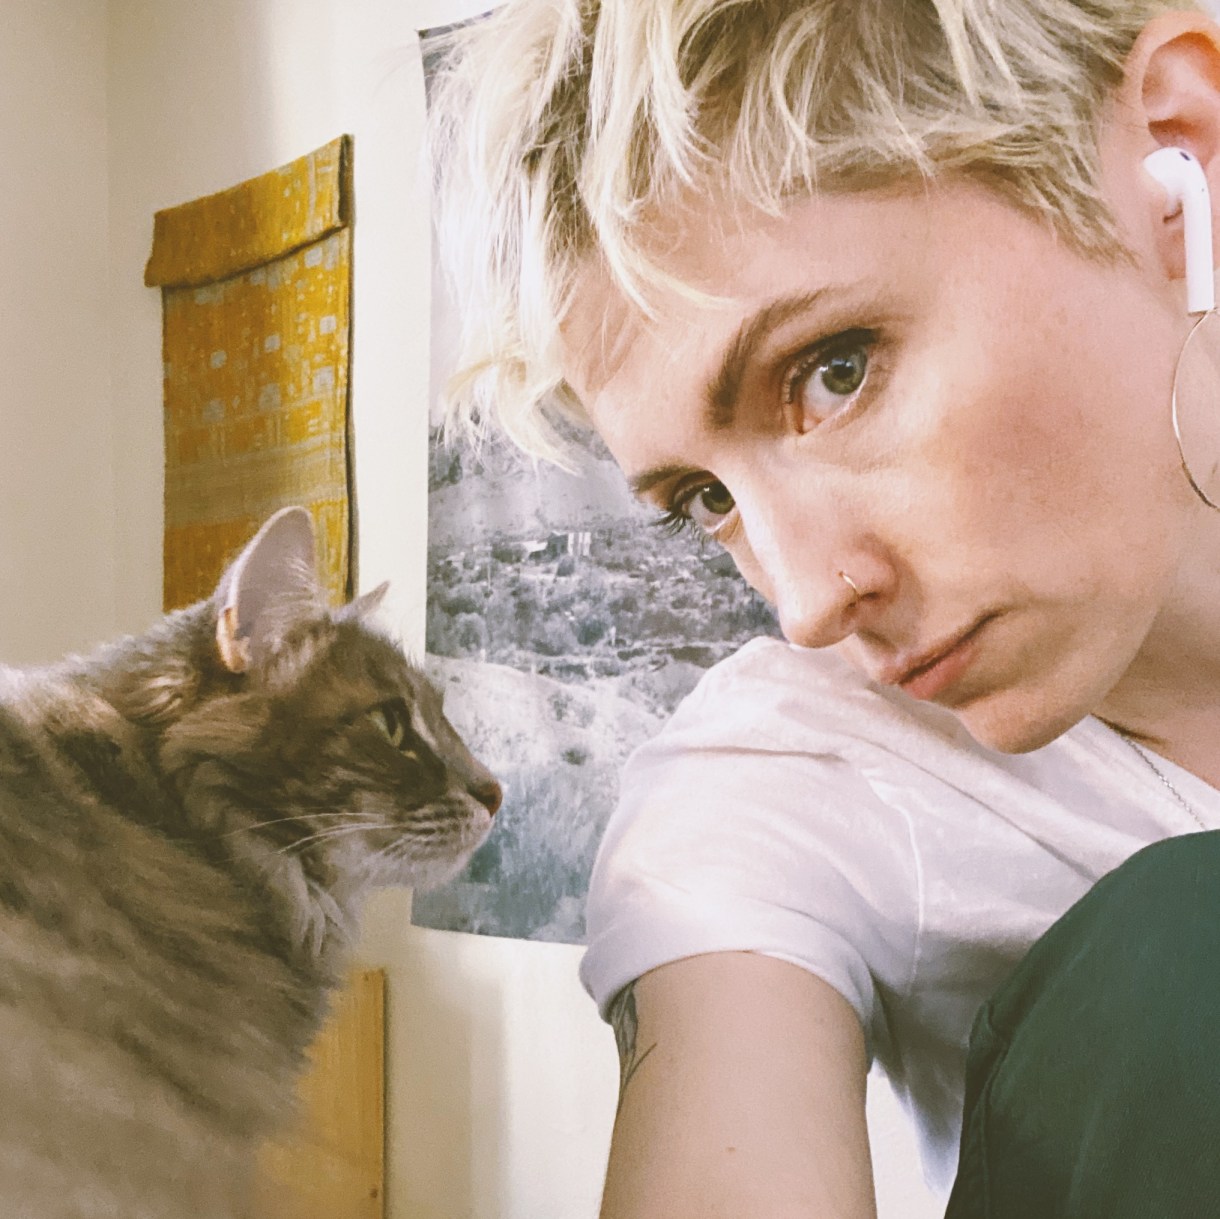 Laneia leans in for a photo with her cat winona. Laneia is a white woman with blonde hair looking directly at the camera. Her hair is short and she is wearing a white tee shirt. The cat is a tabby looking cat.